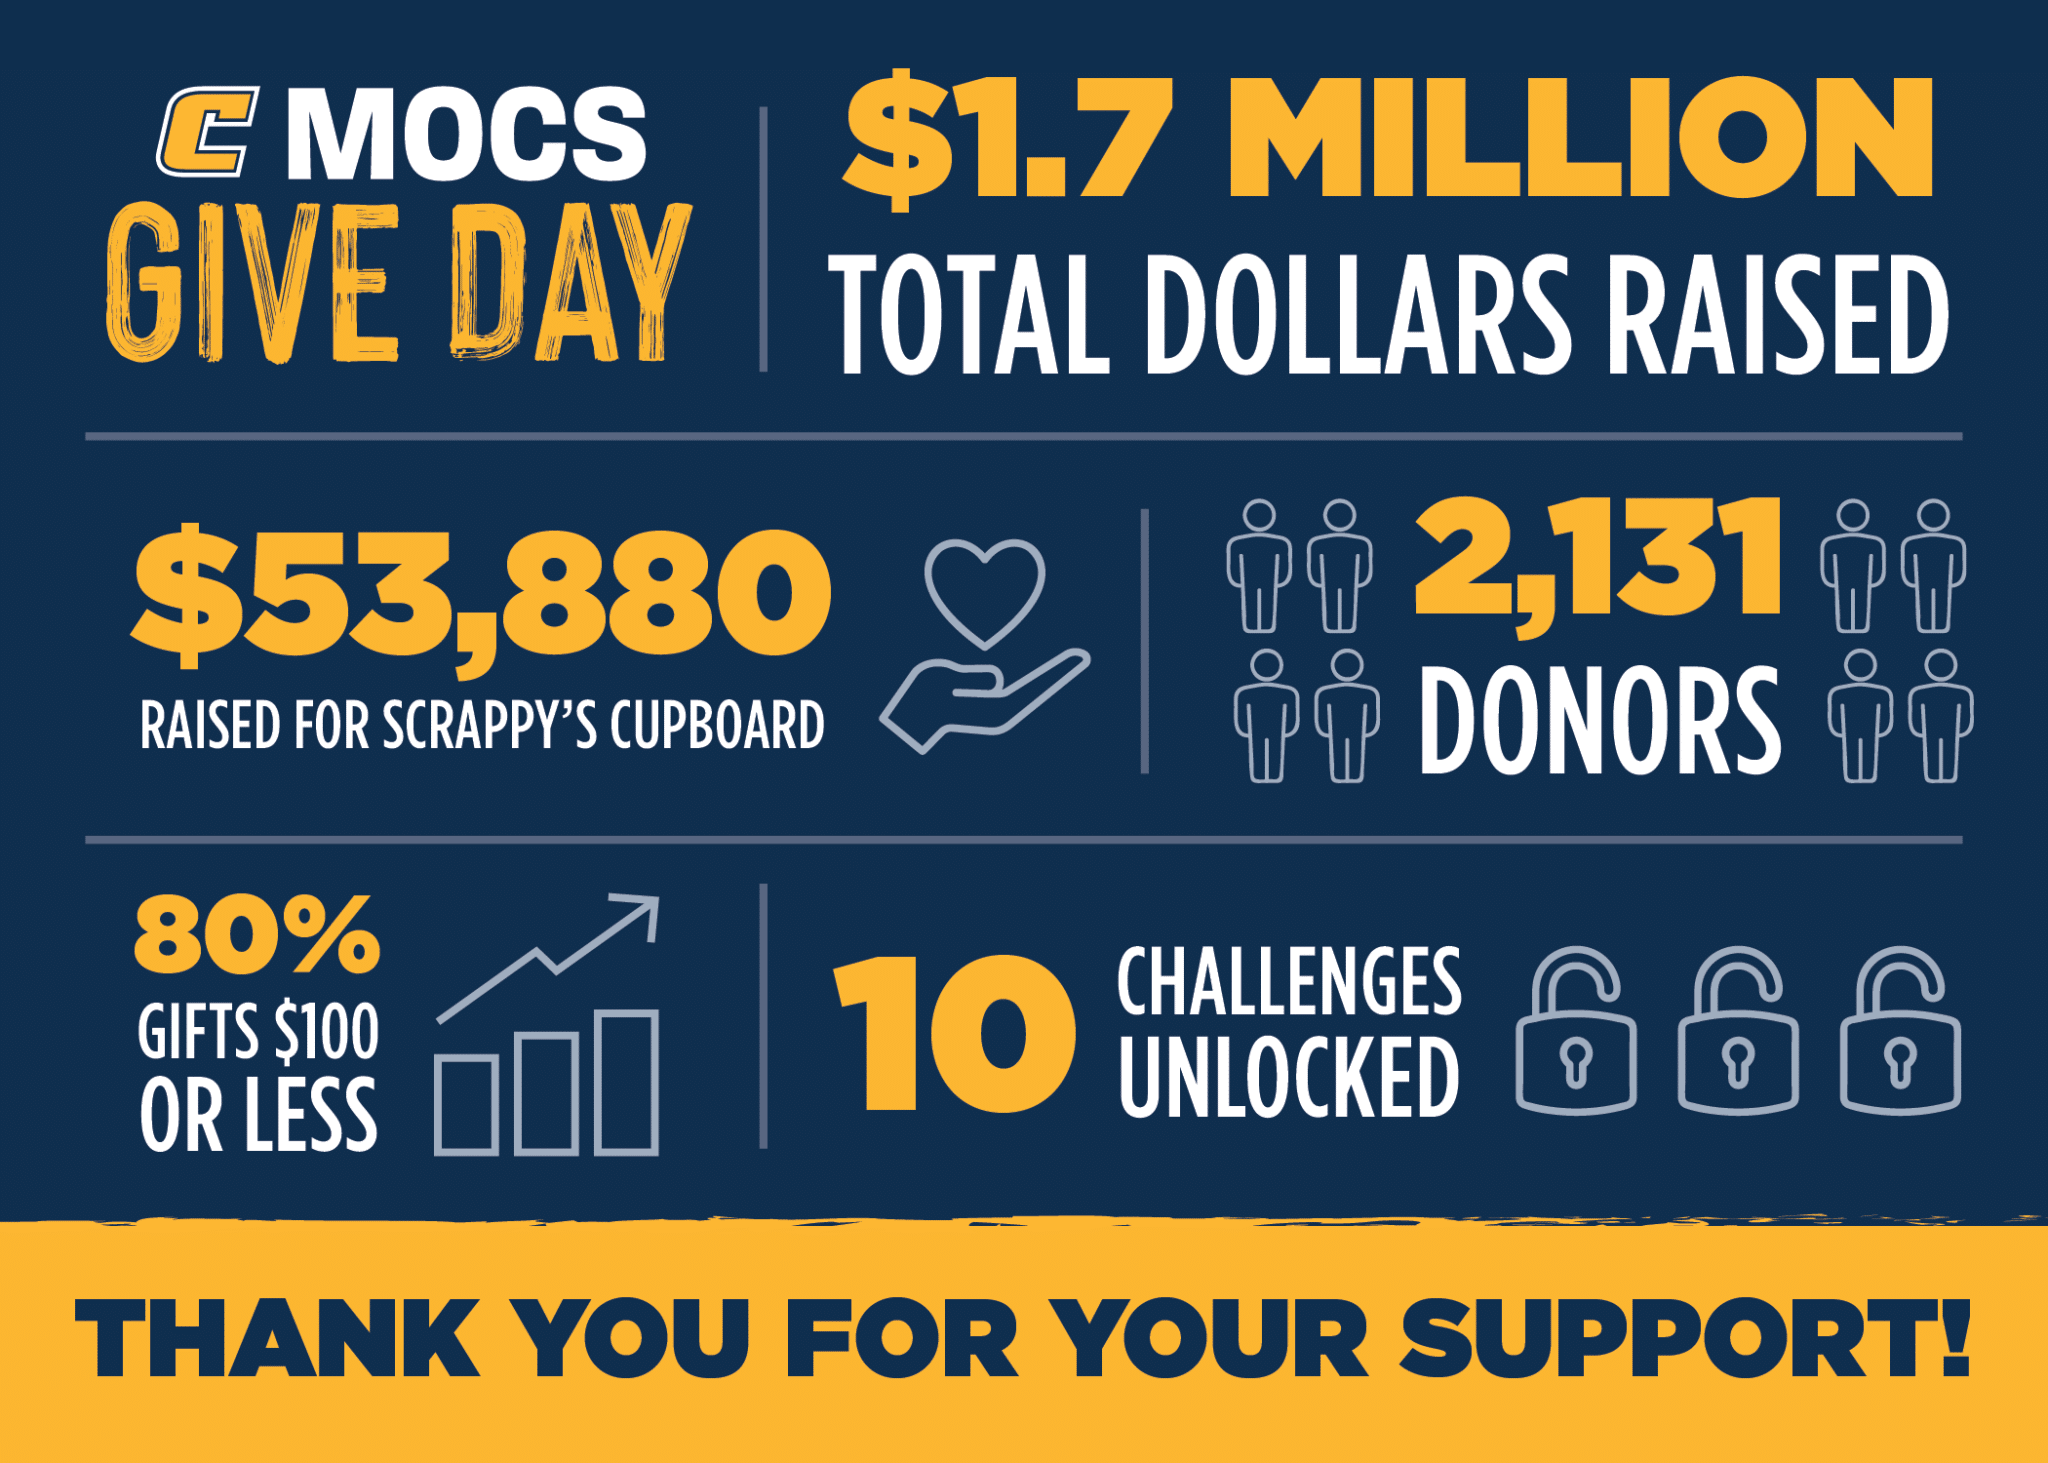 Statistics for Mocs Give Day event in 2023